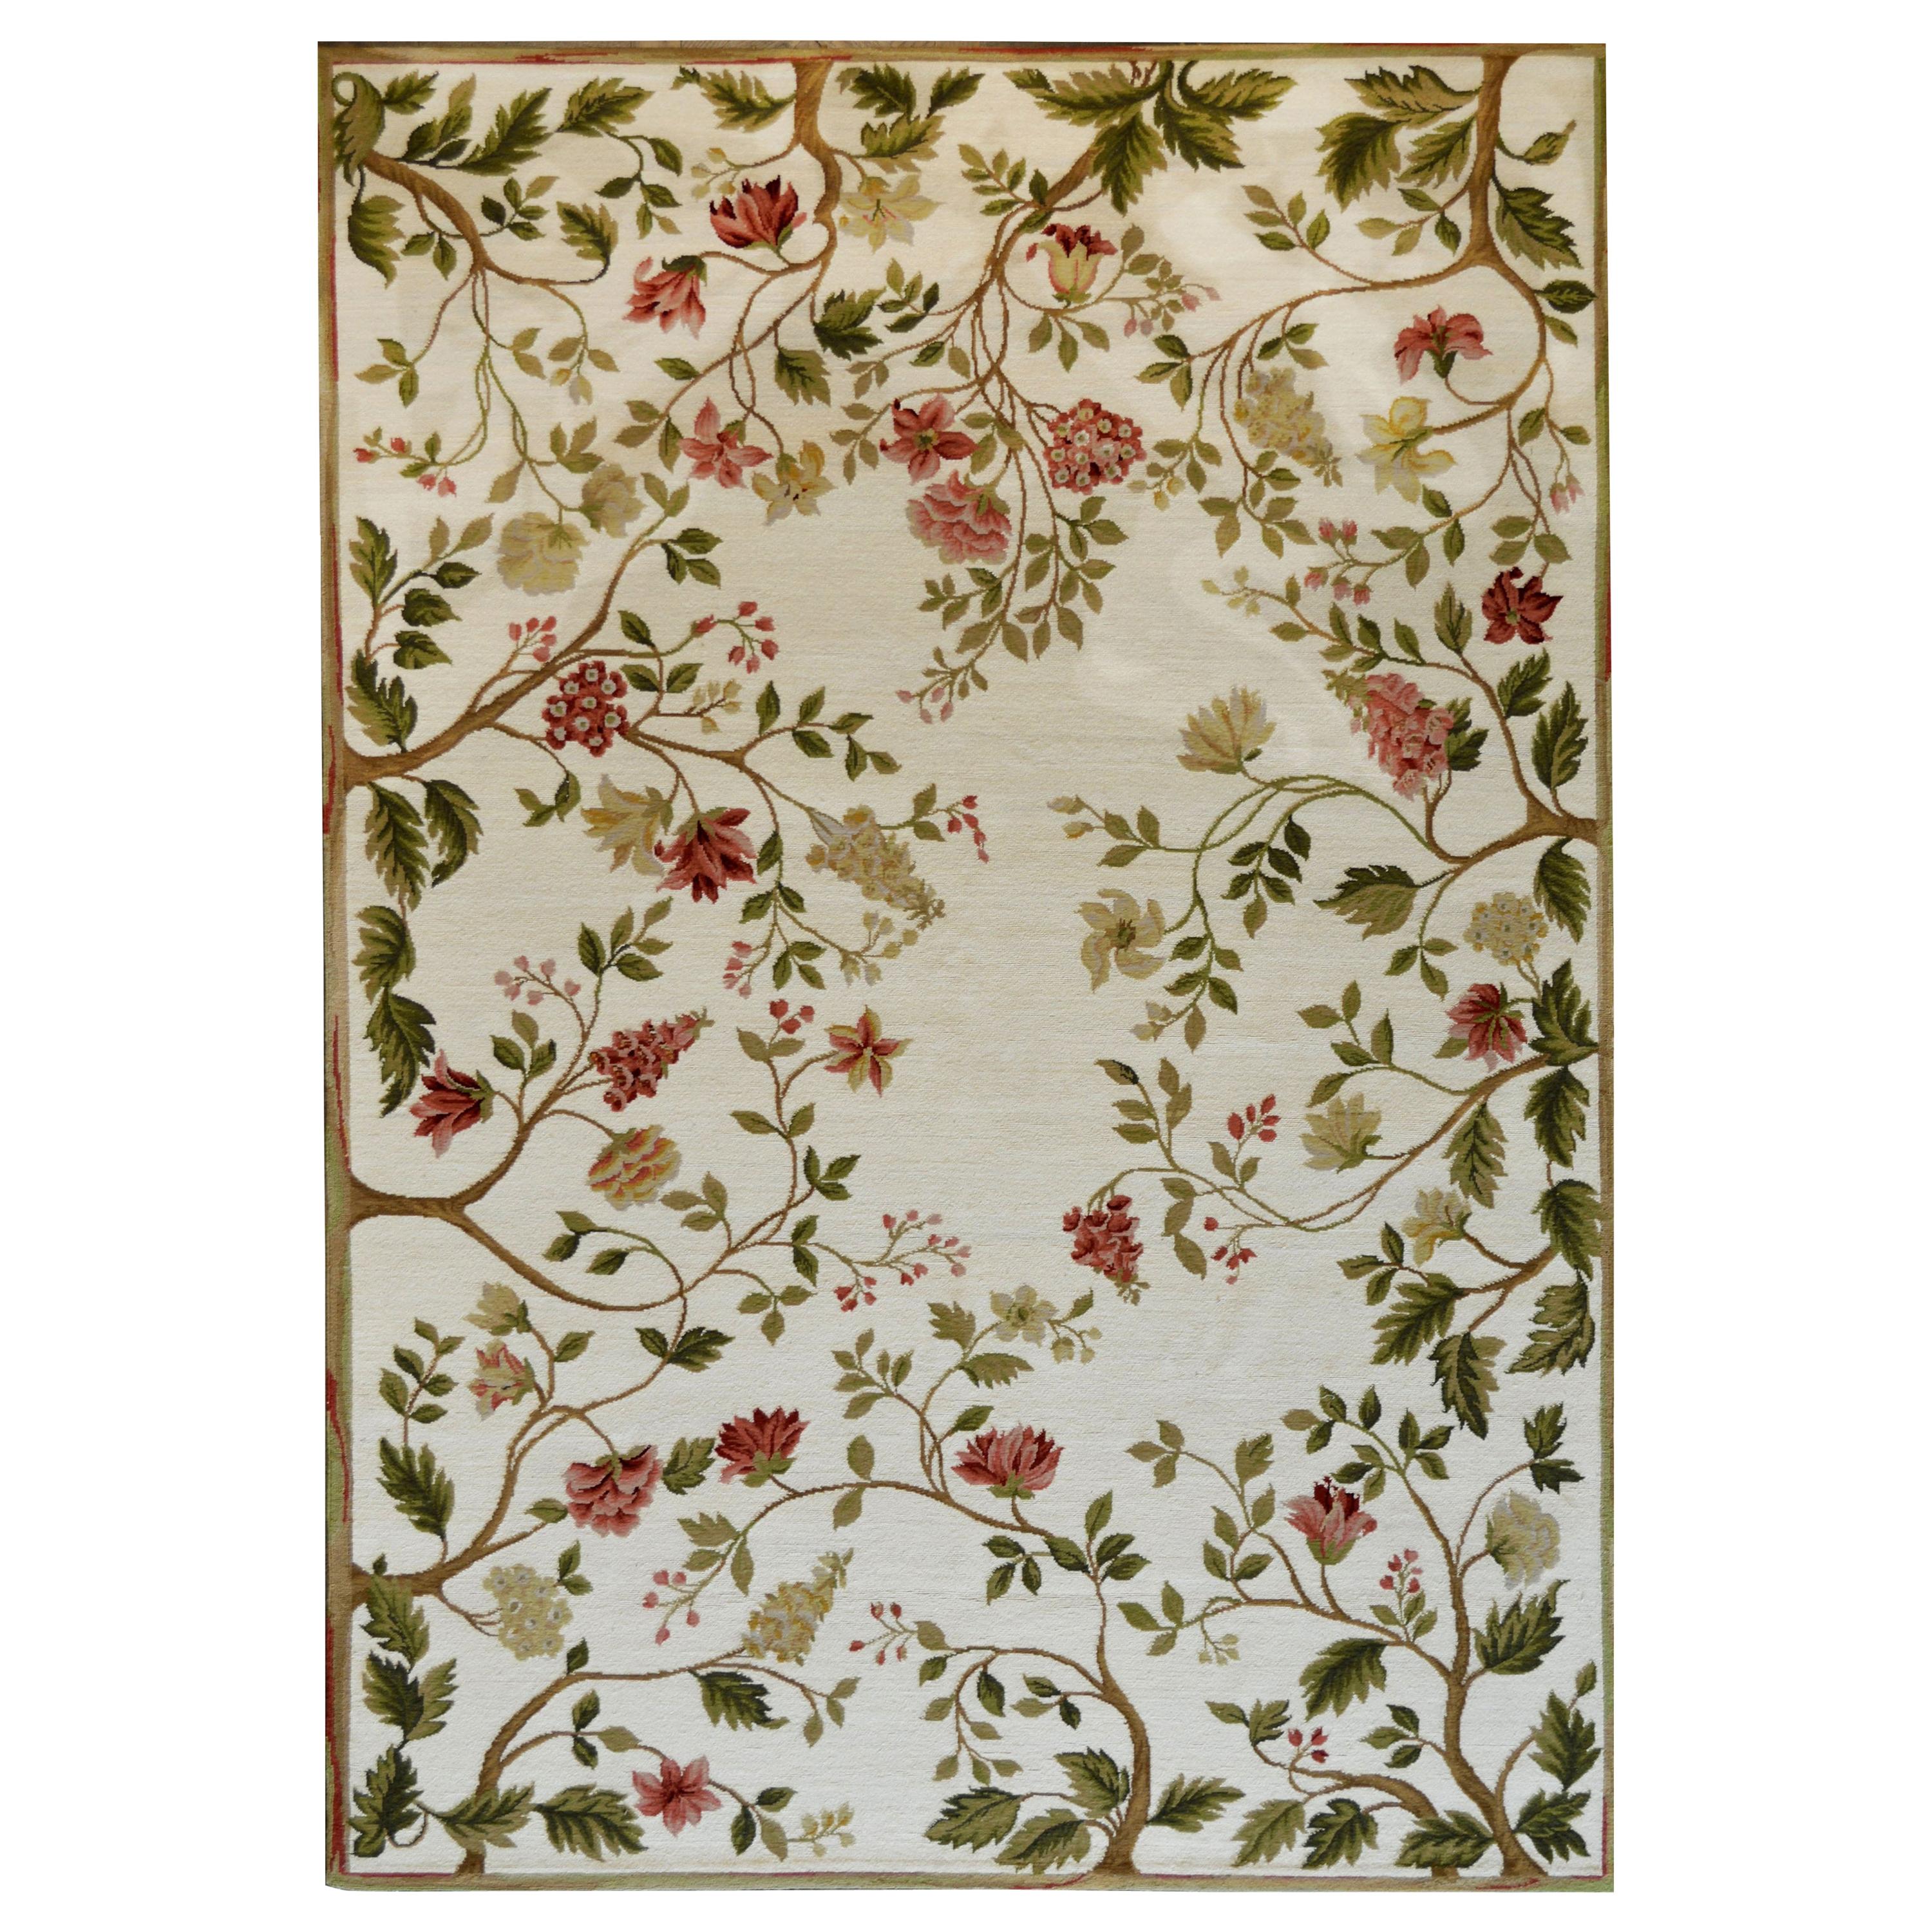 Hand-woven 100% Wool Art Deco-Inspired Floral Rug For Sale